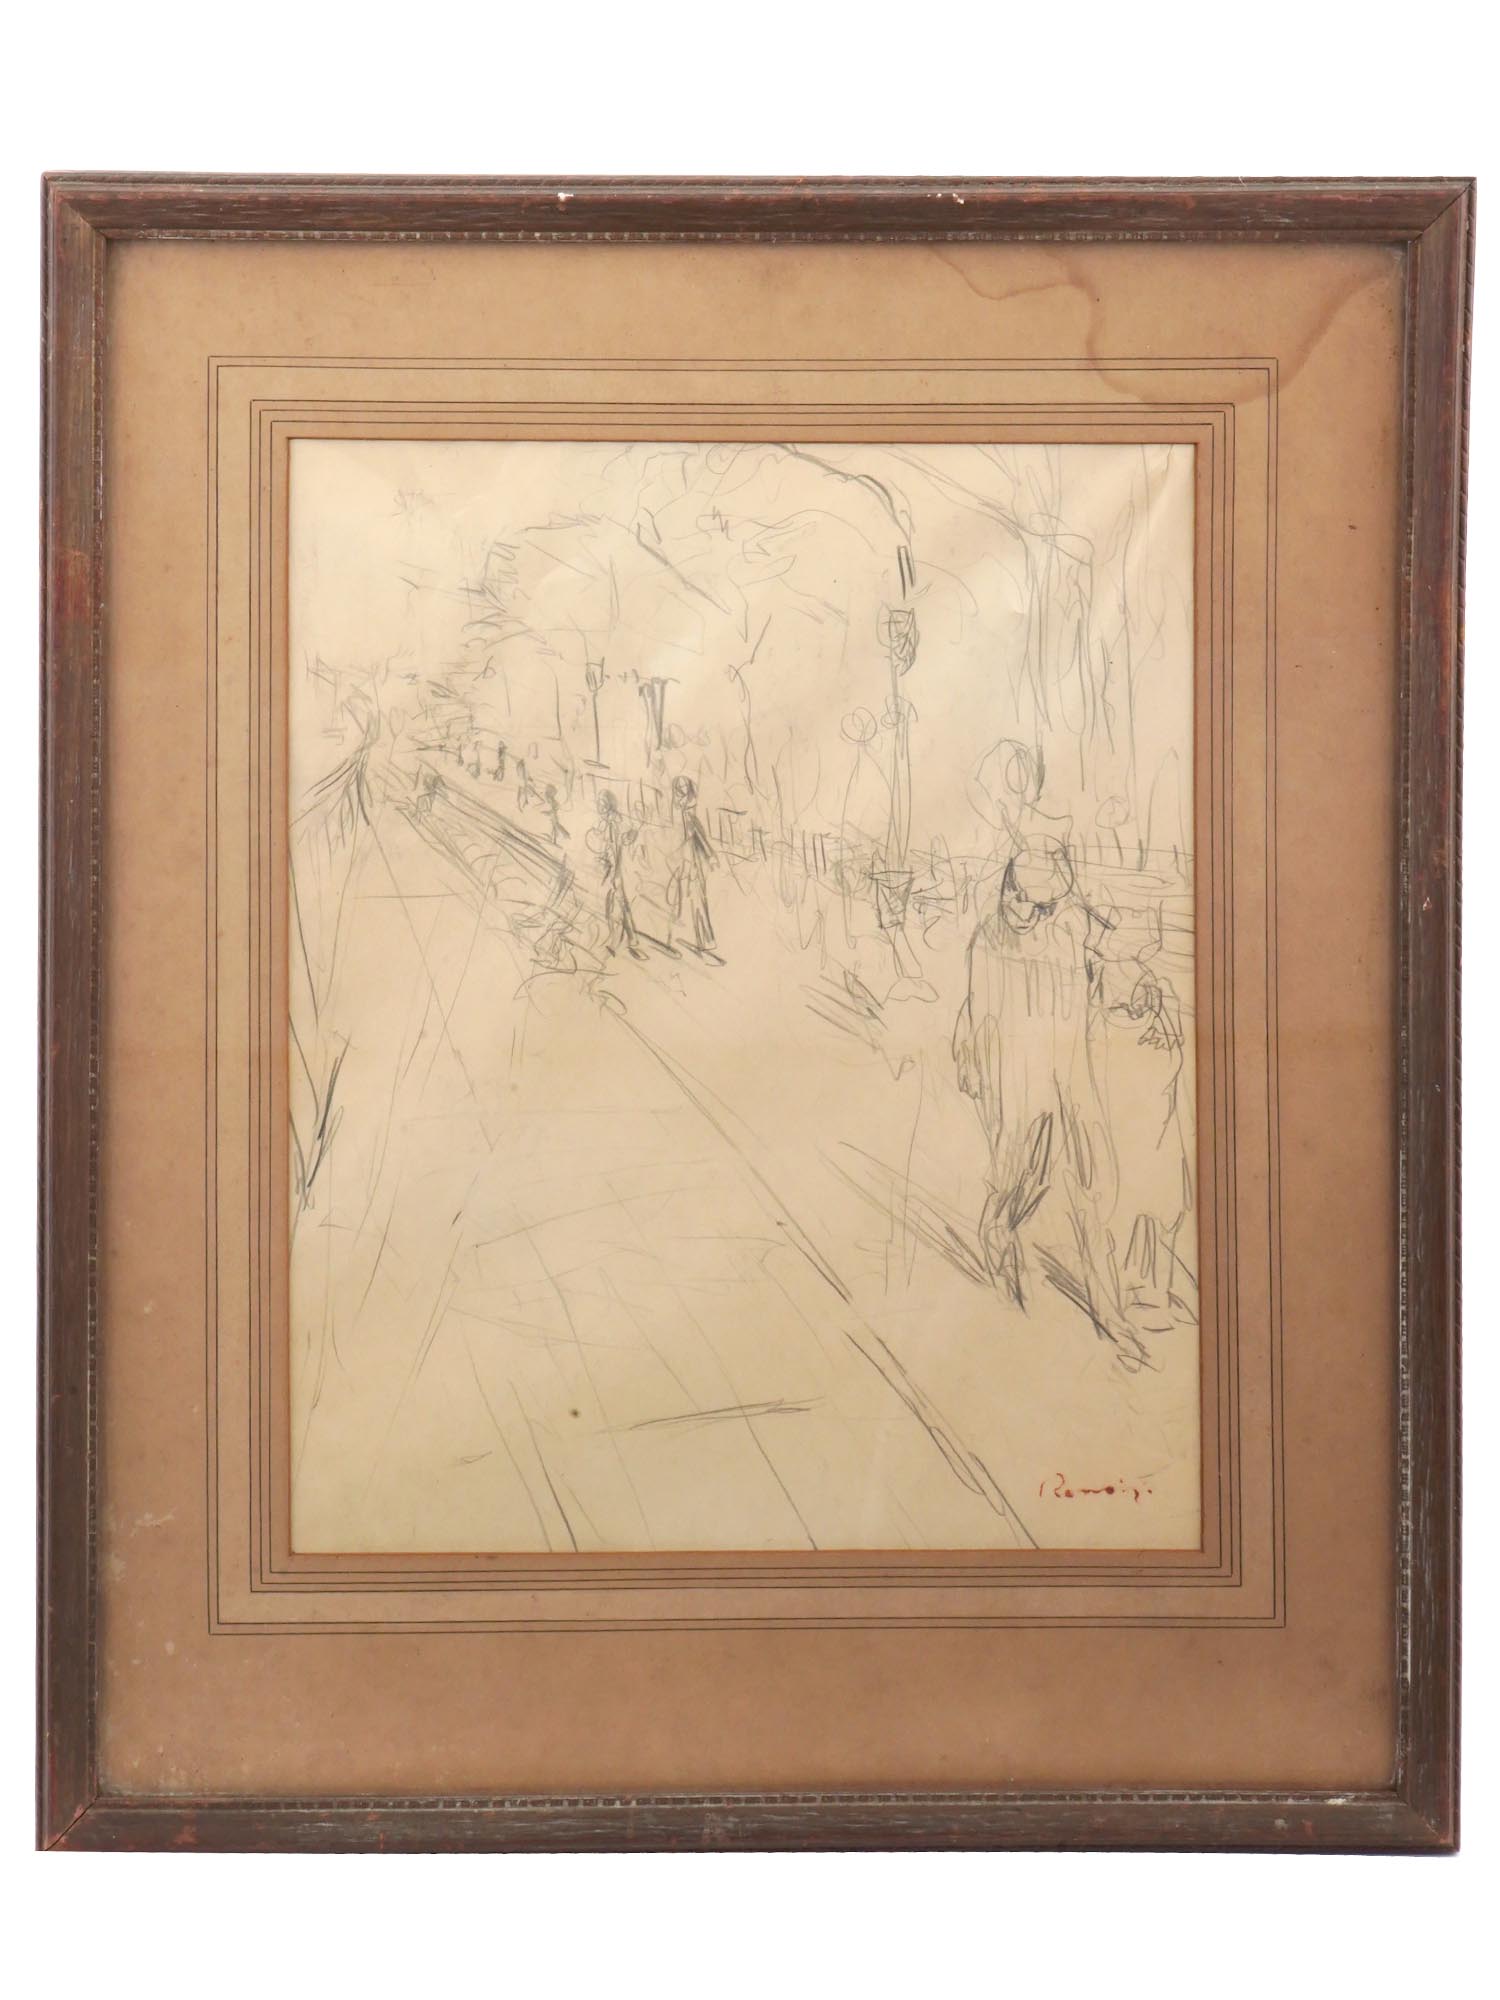 ATTRIBUTED TO RENOIR FRENCH SKETCH PENCIL PAINTING PIC-0